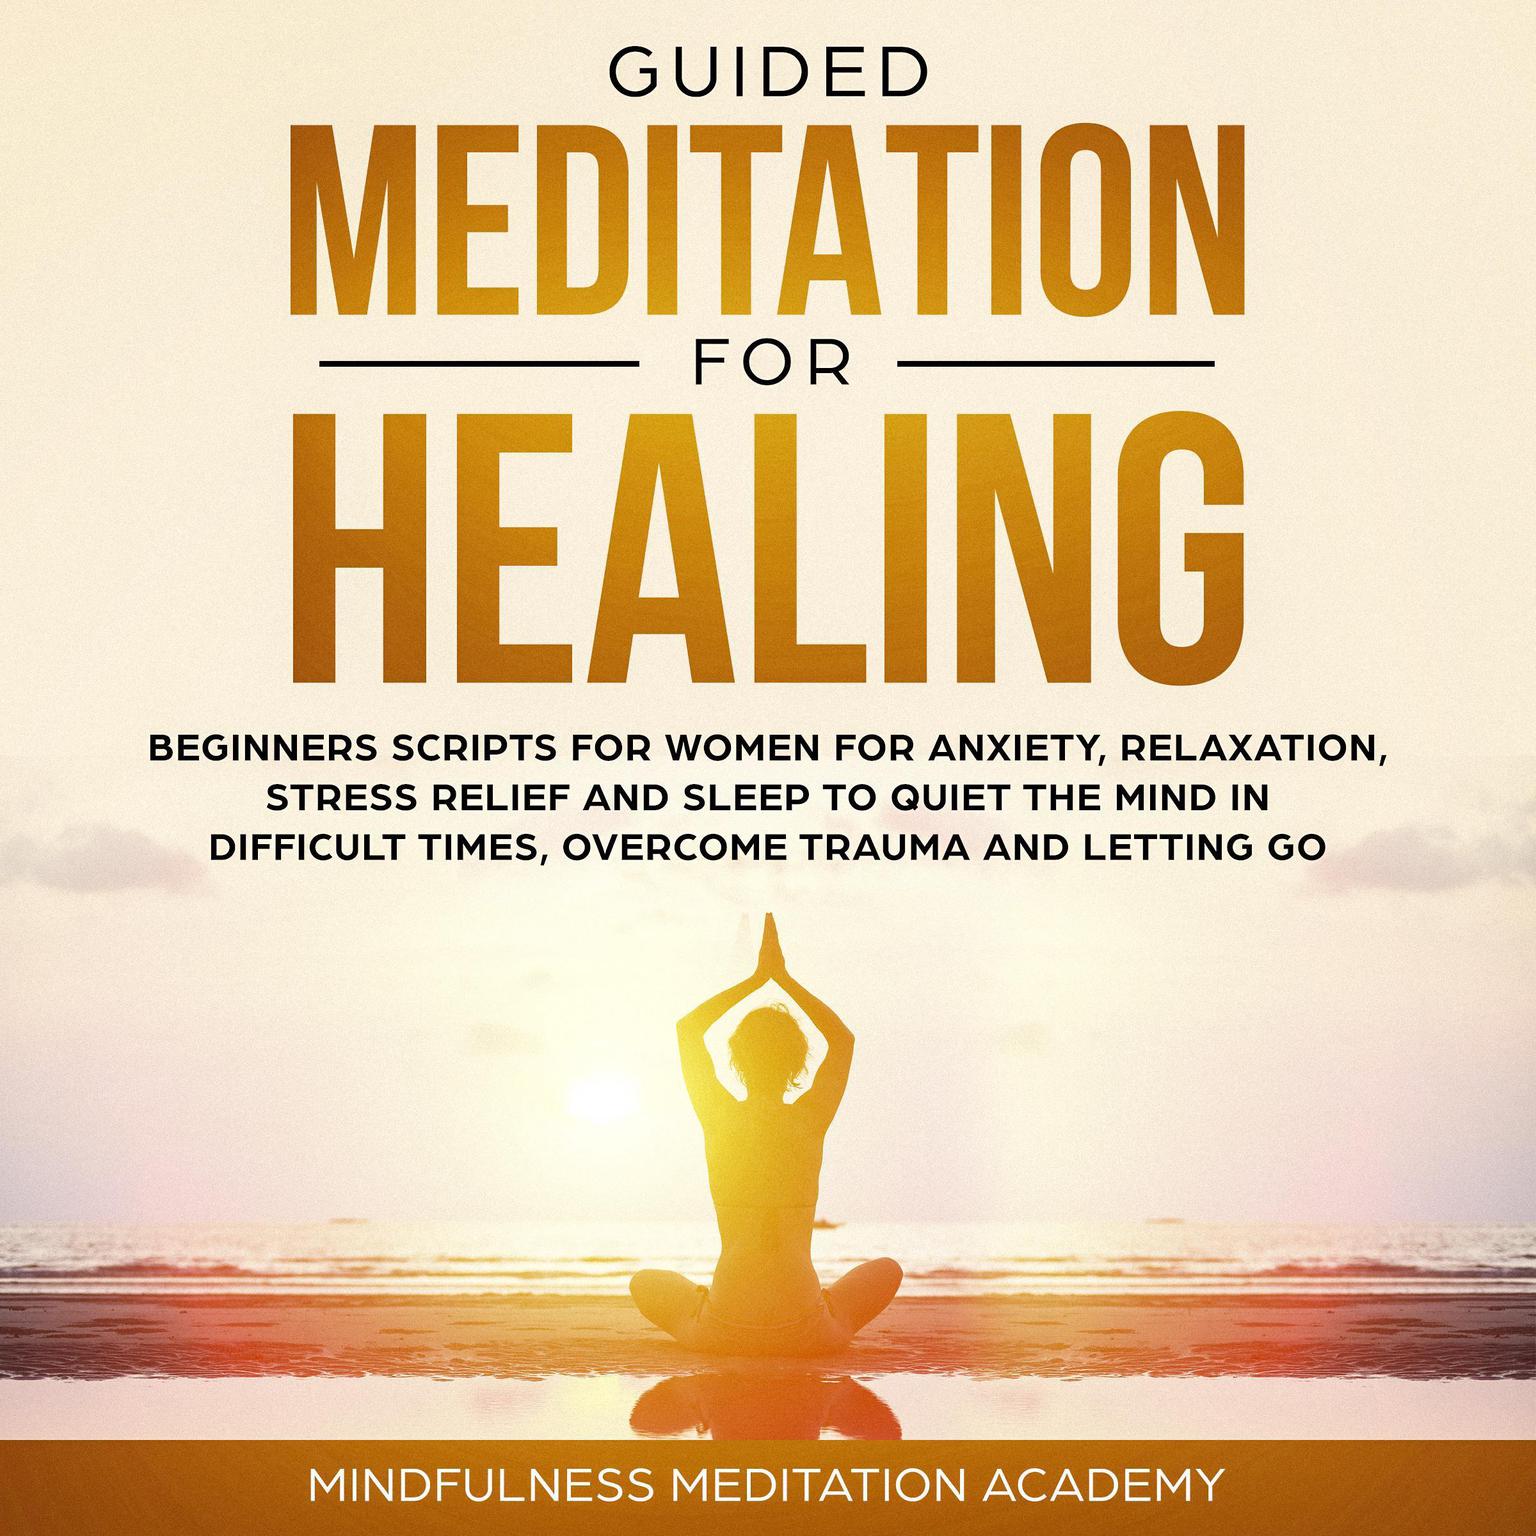 Guided Meditation for Healing: Beginners Scripts for Women for Anxiety, Relaxation, Stress Relief and Sleep to quiet the Mind in difficult Times, overcome Trauma and letting go Audiobook, by Mindfulness Meditation Academy